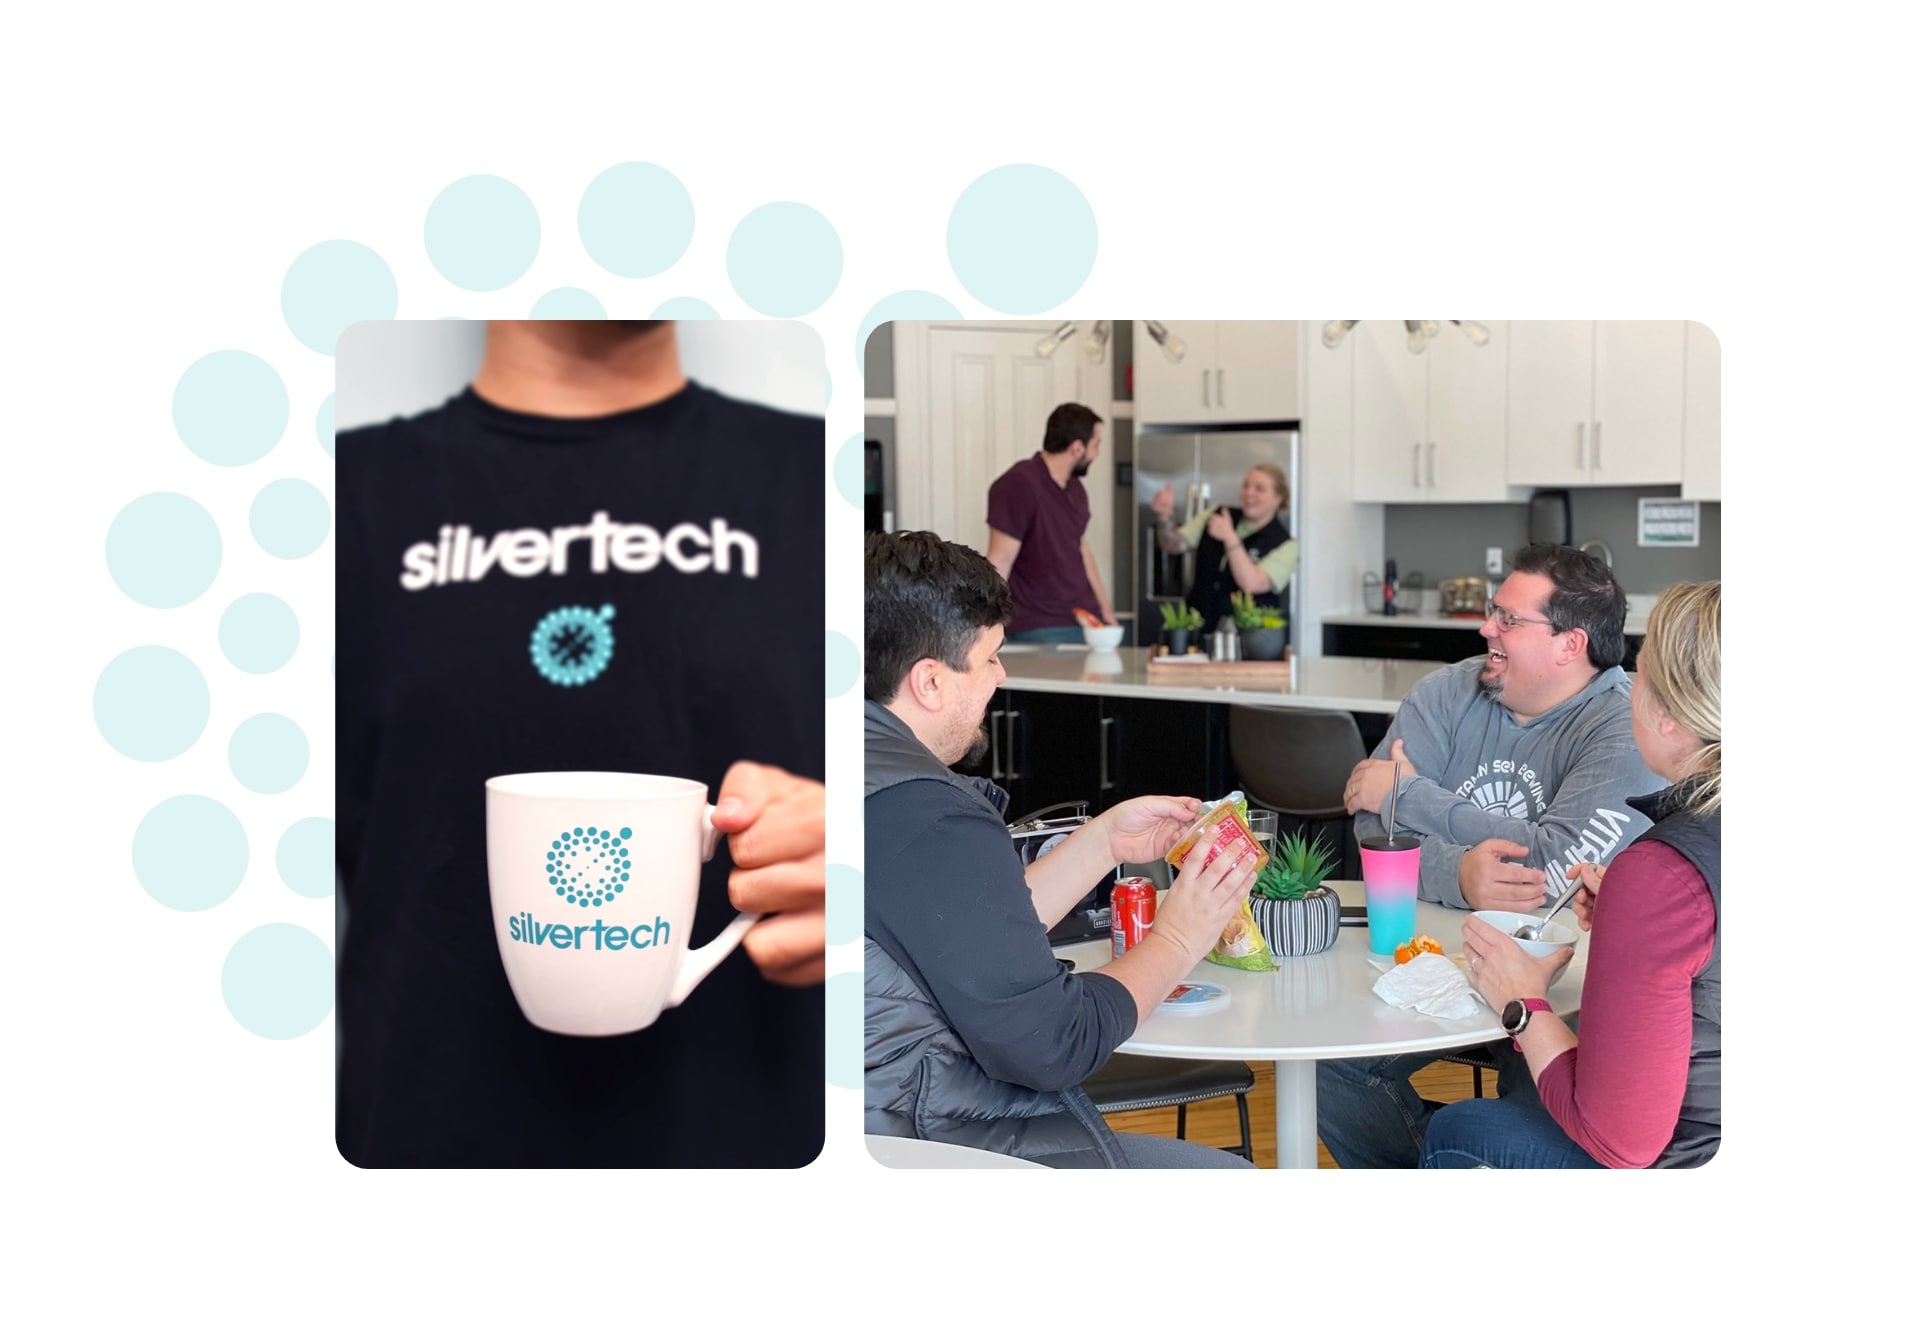 Image 1 - close up of someone wearing an ST shirt holding a SilverTech mug, second imagery of the crew in the kitchen eating and laughing